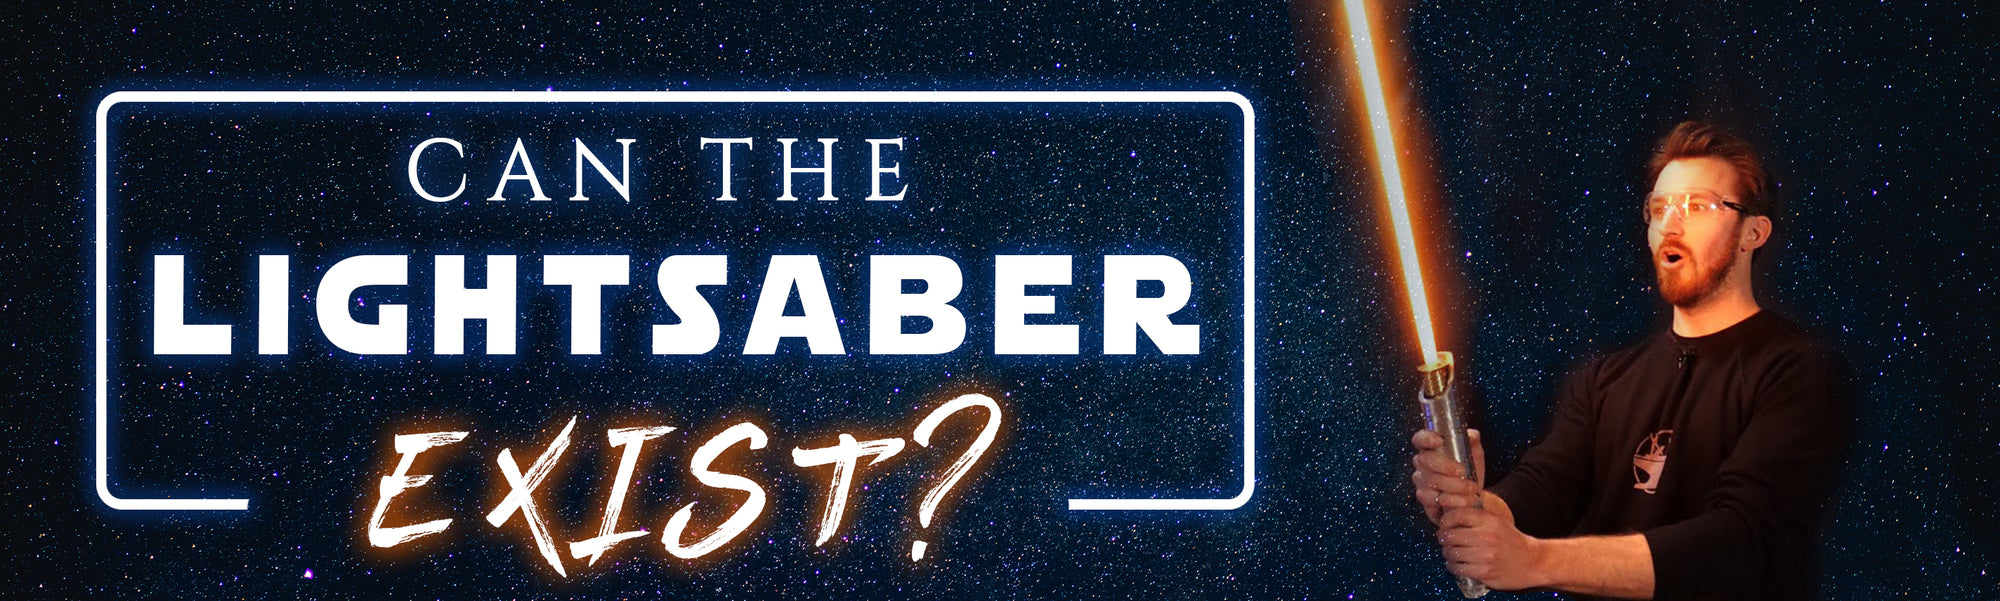 Can we create a Real Star Wars Lightsaber